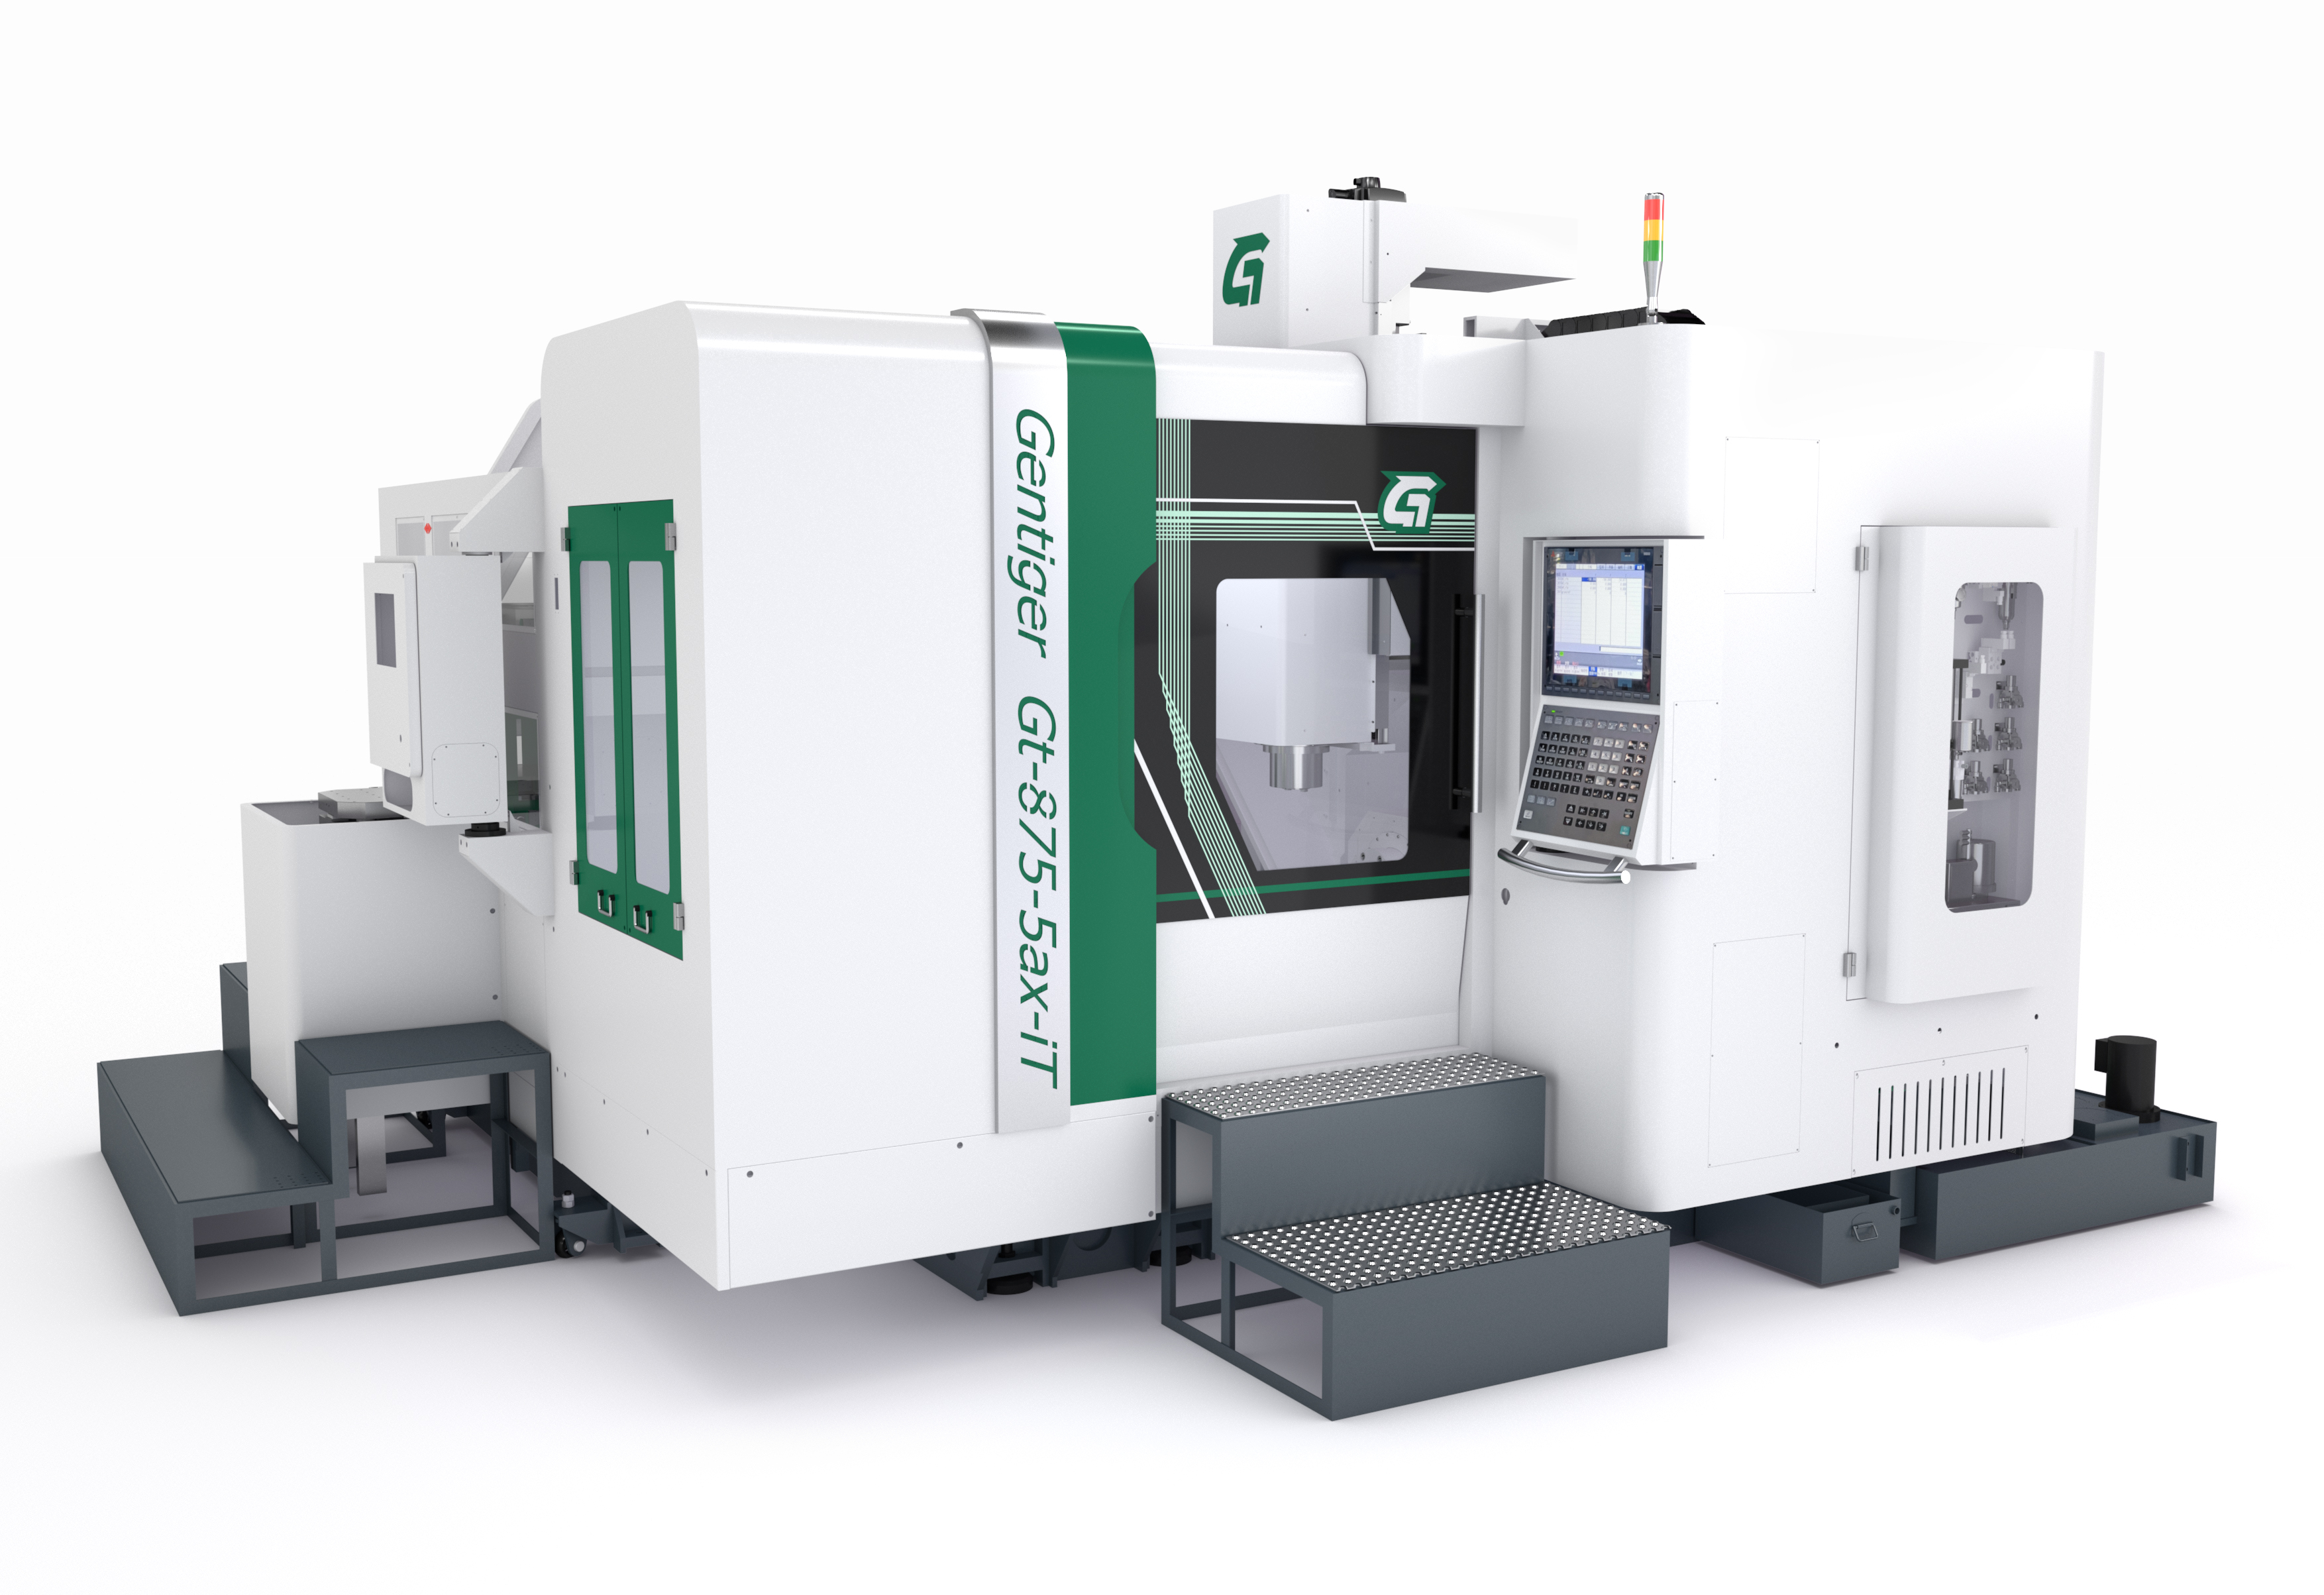 GT-875-5AX-iT Intelligent Integrated High Speed 5 Axis Machining Center